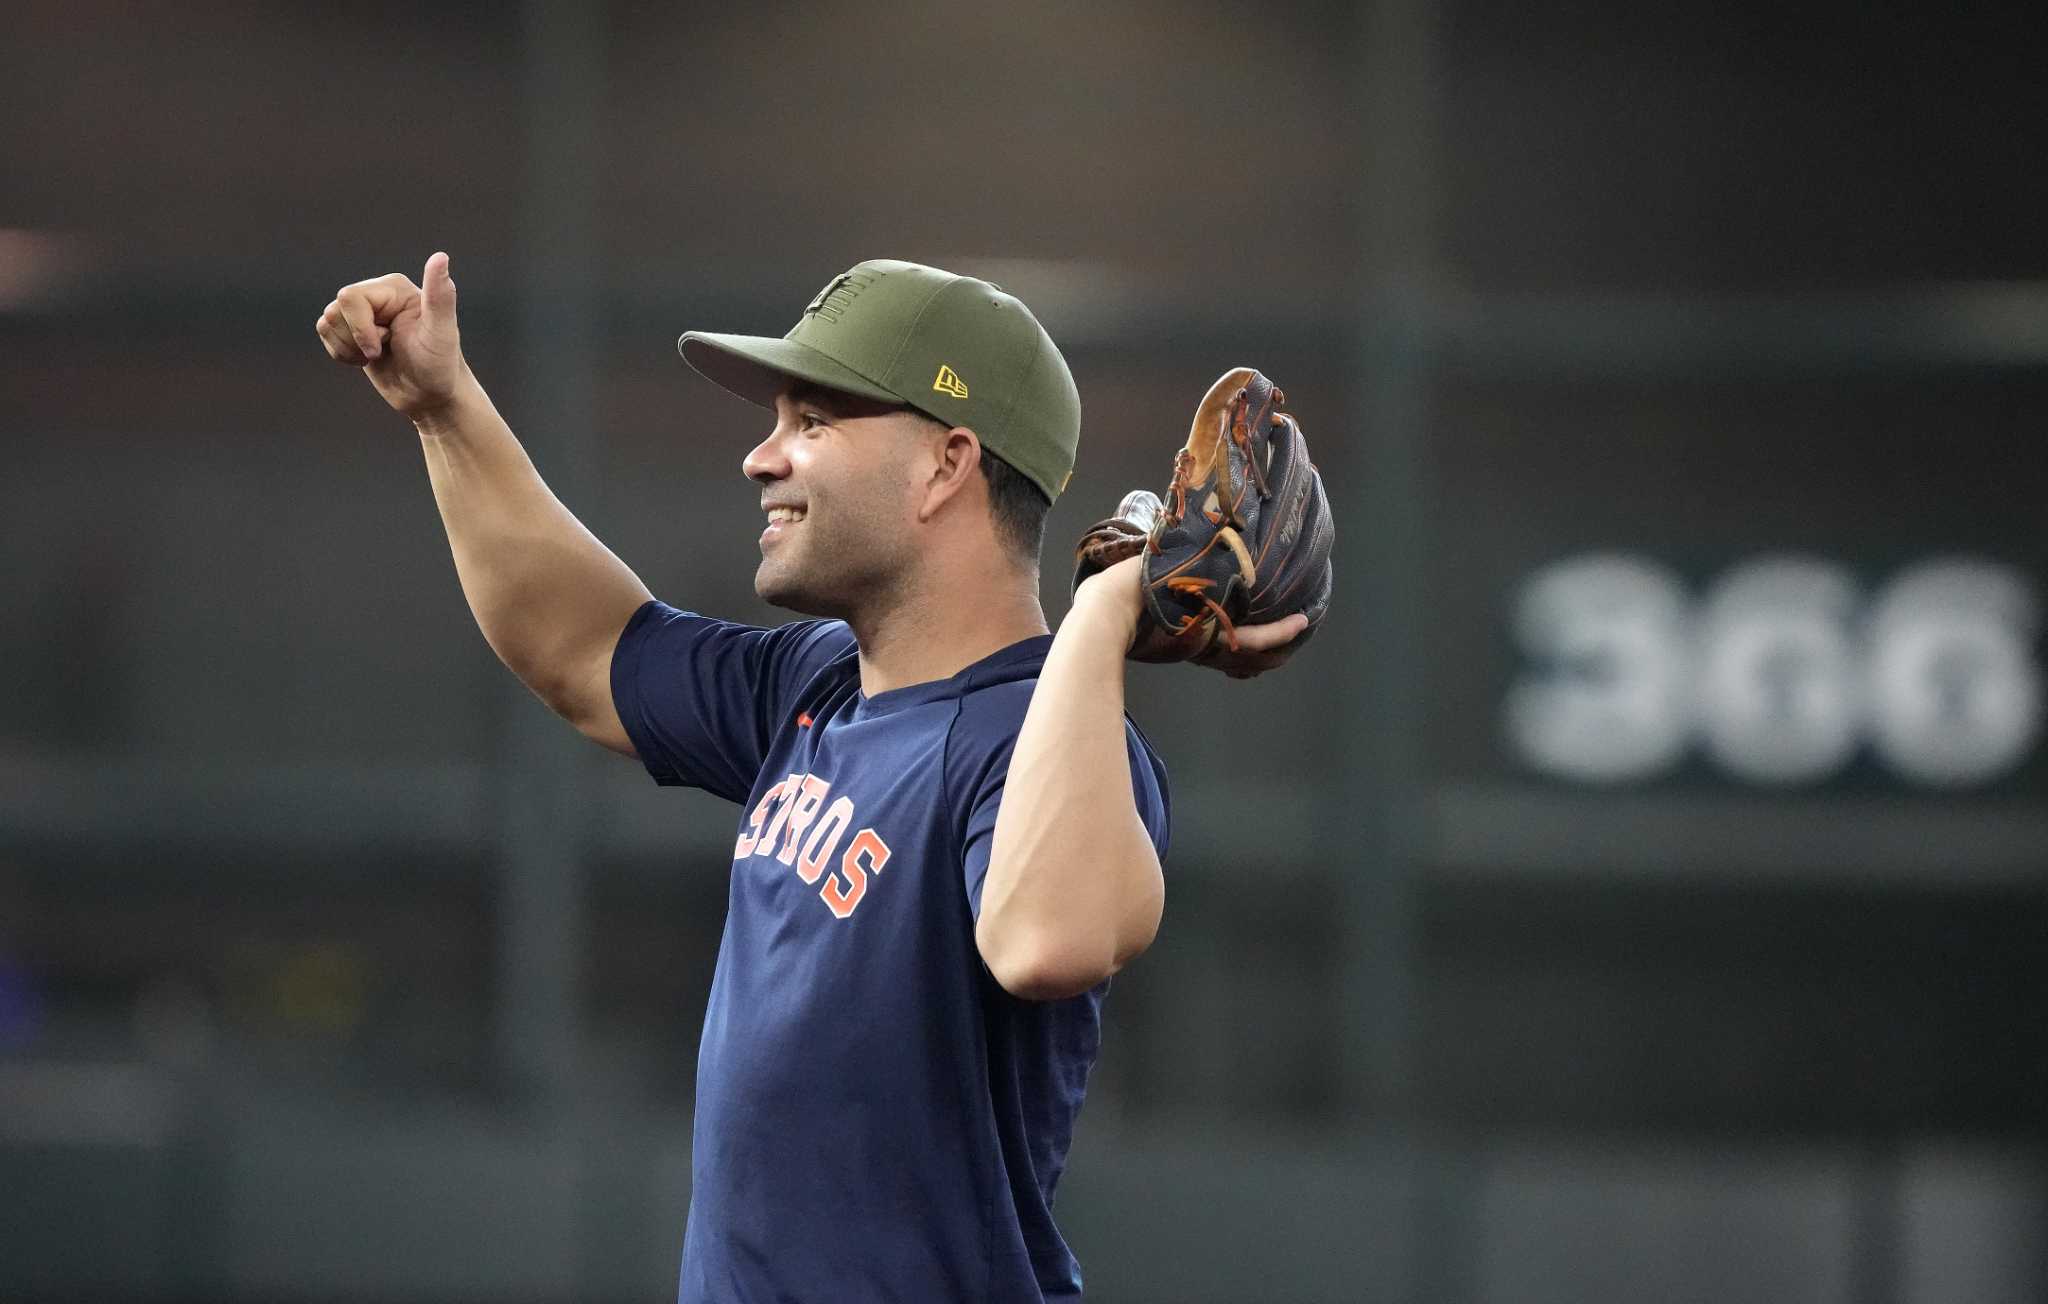 With Jose Altuve's Return, What's Next for Houston?